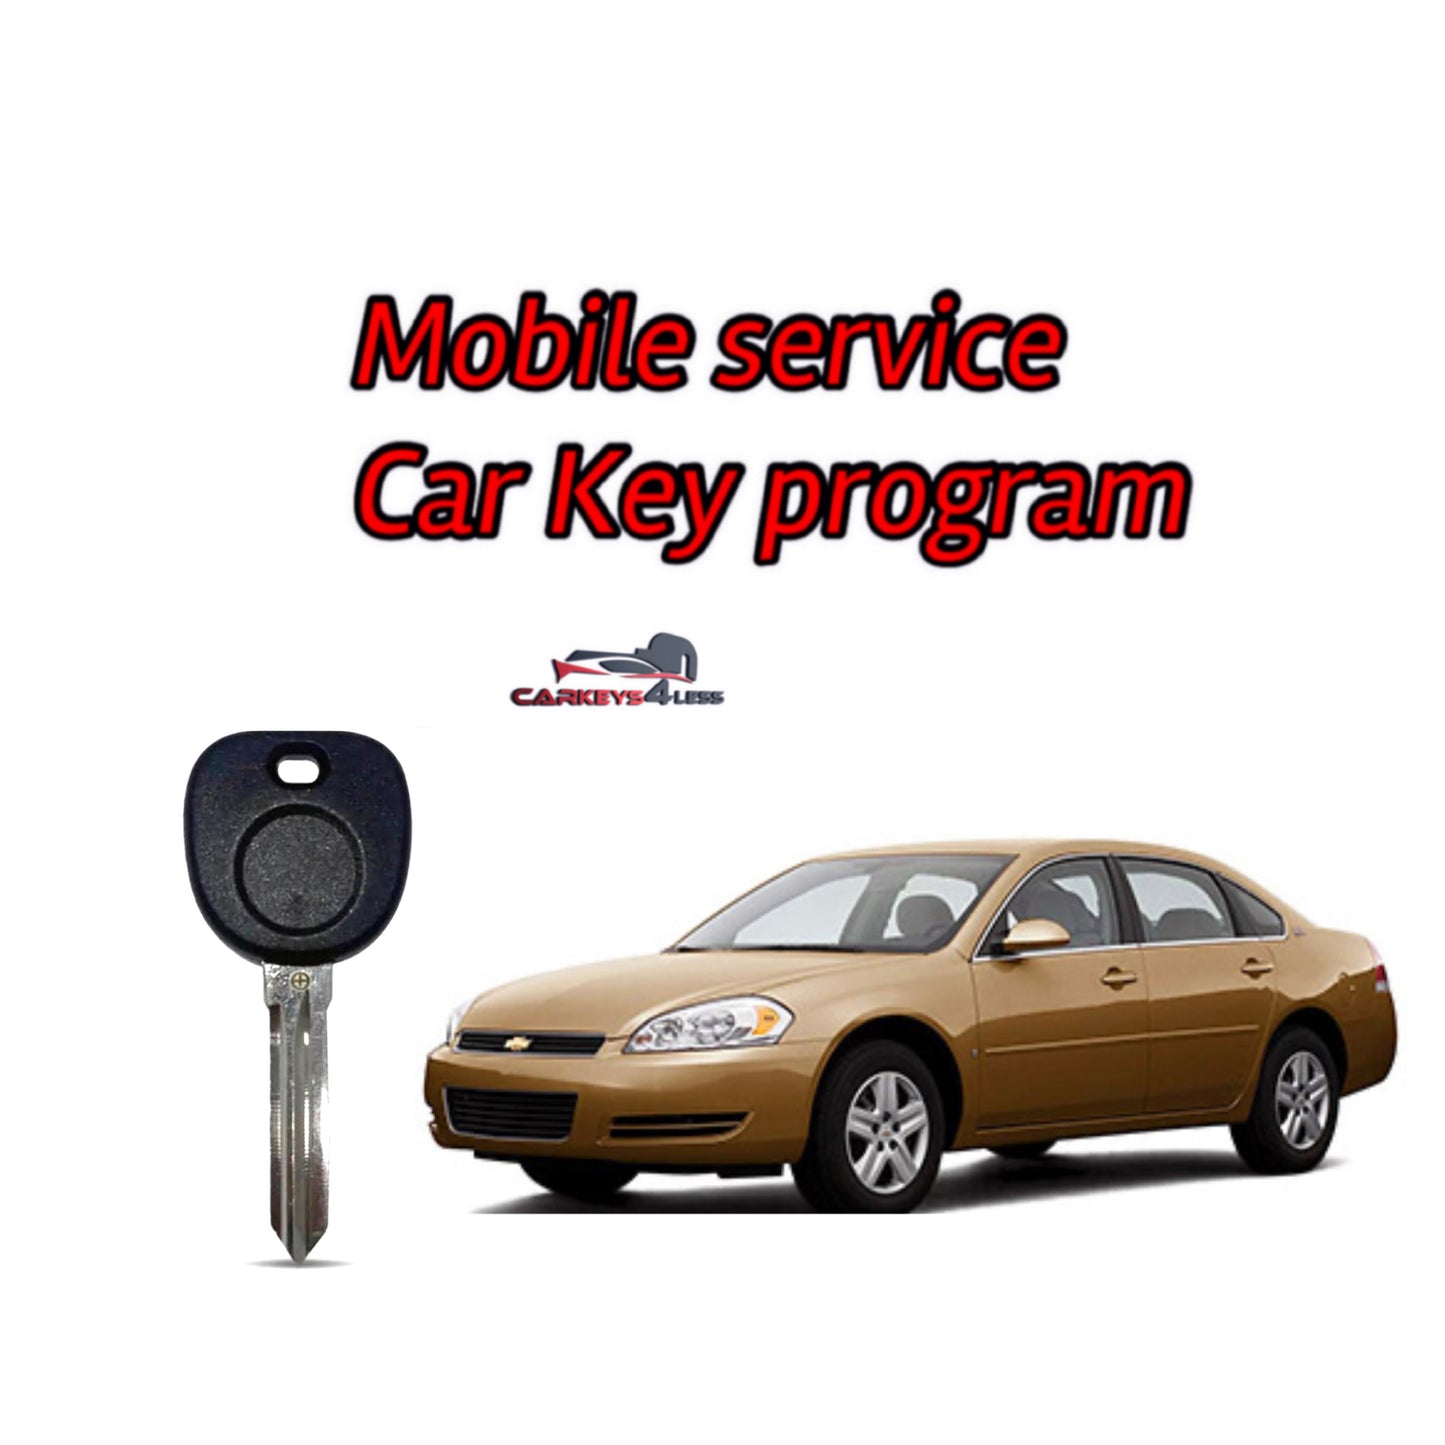 Mobile service for a chevrolet car key replacement